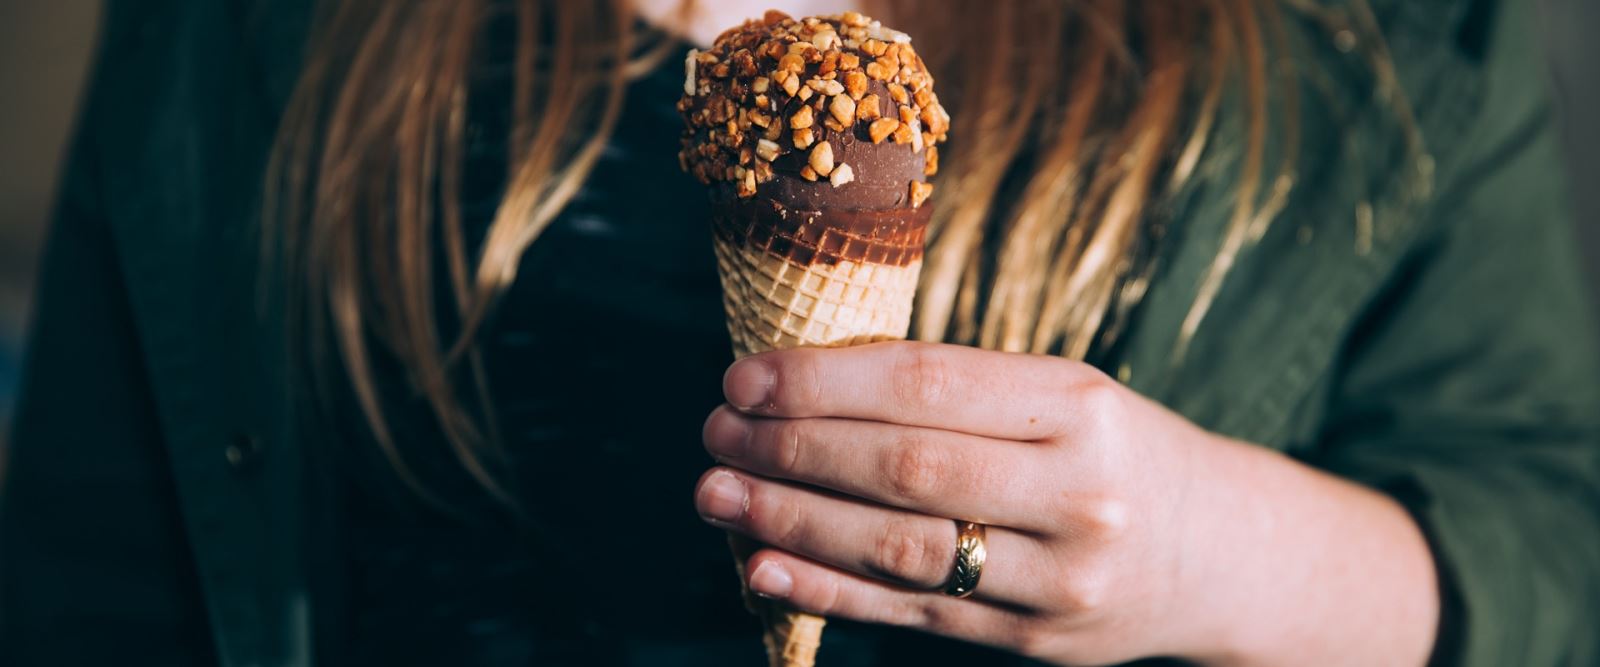 Photo of a girl holding an ice cream